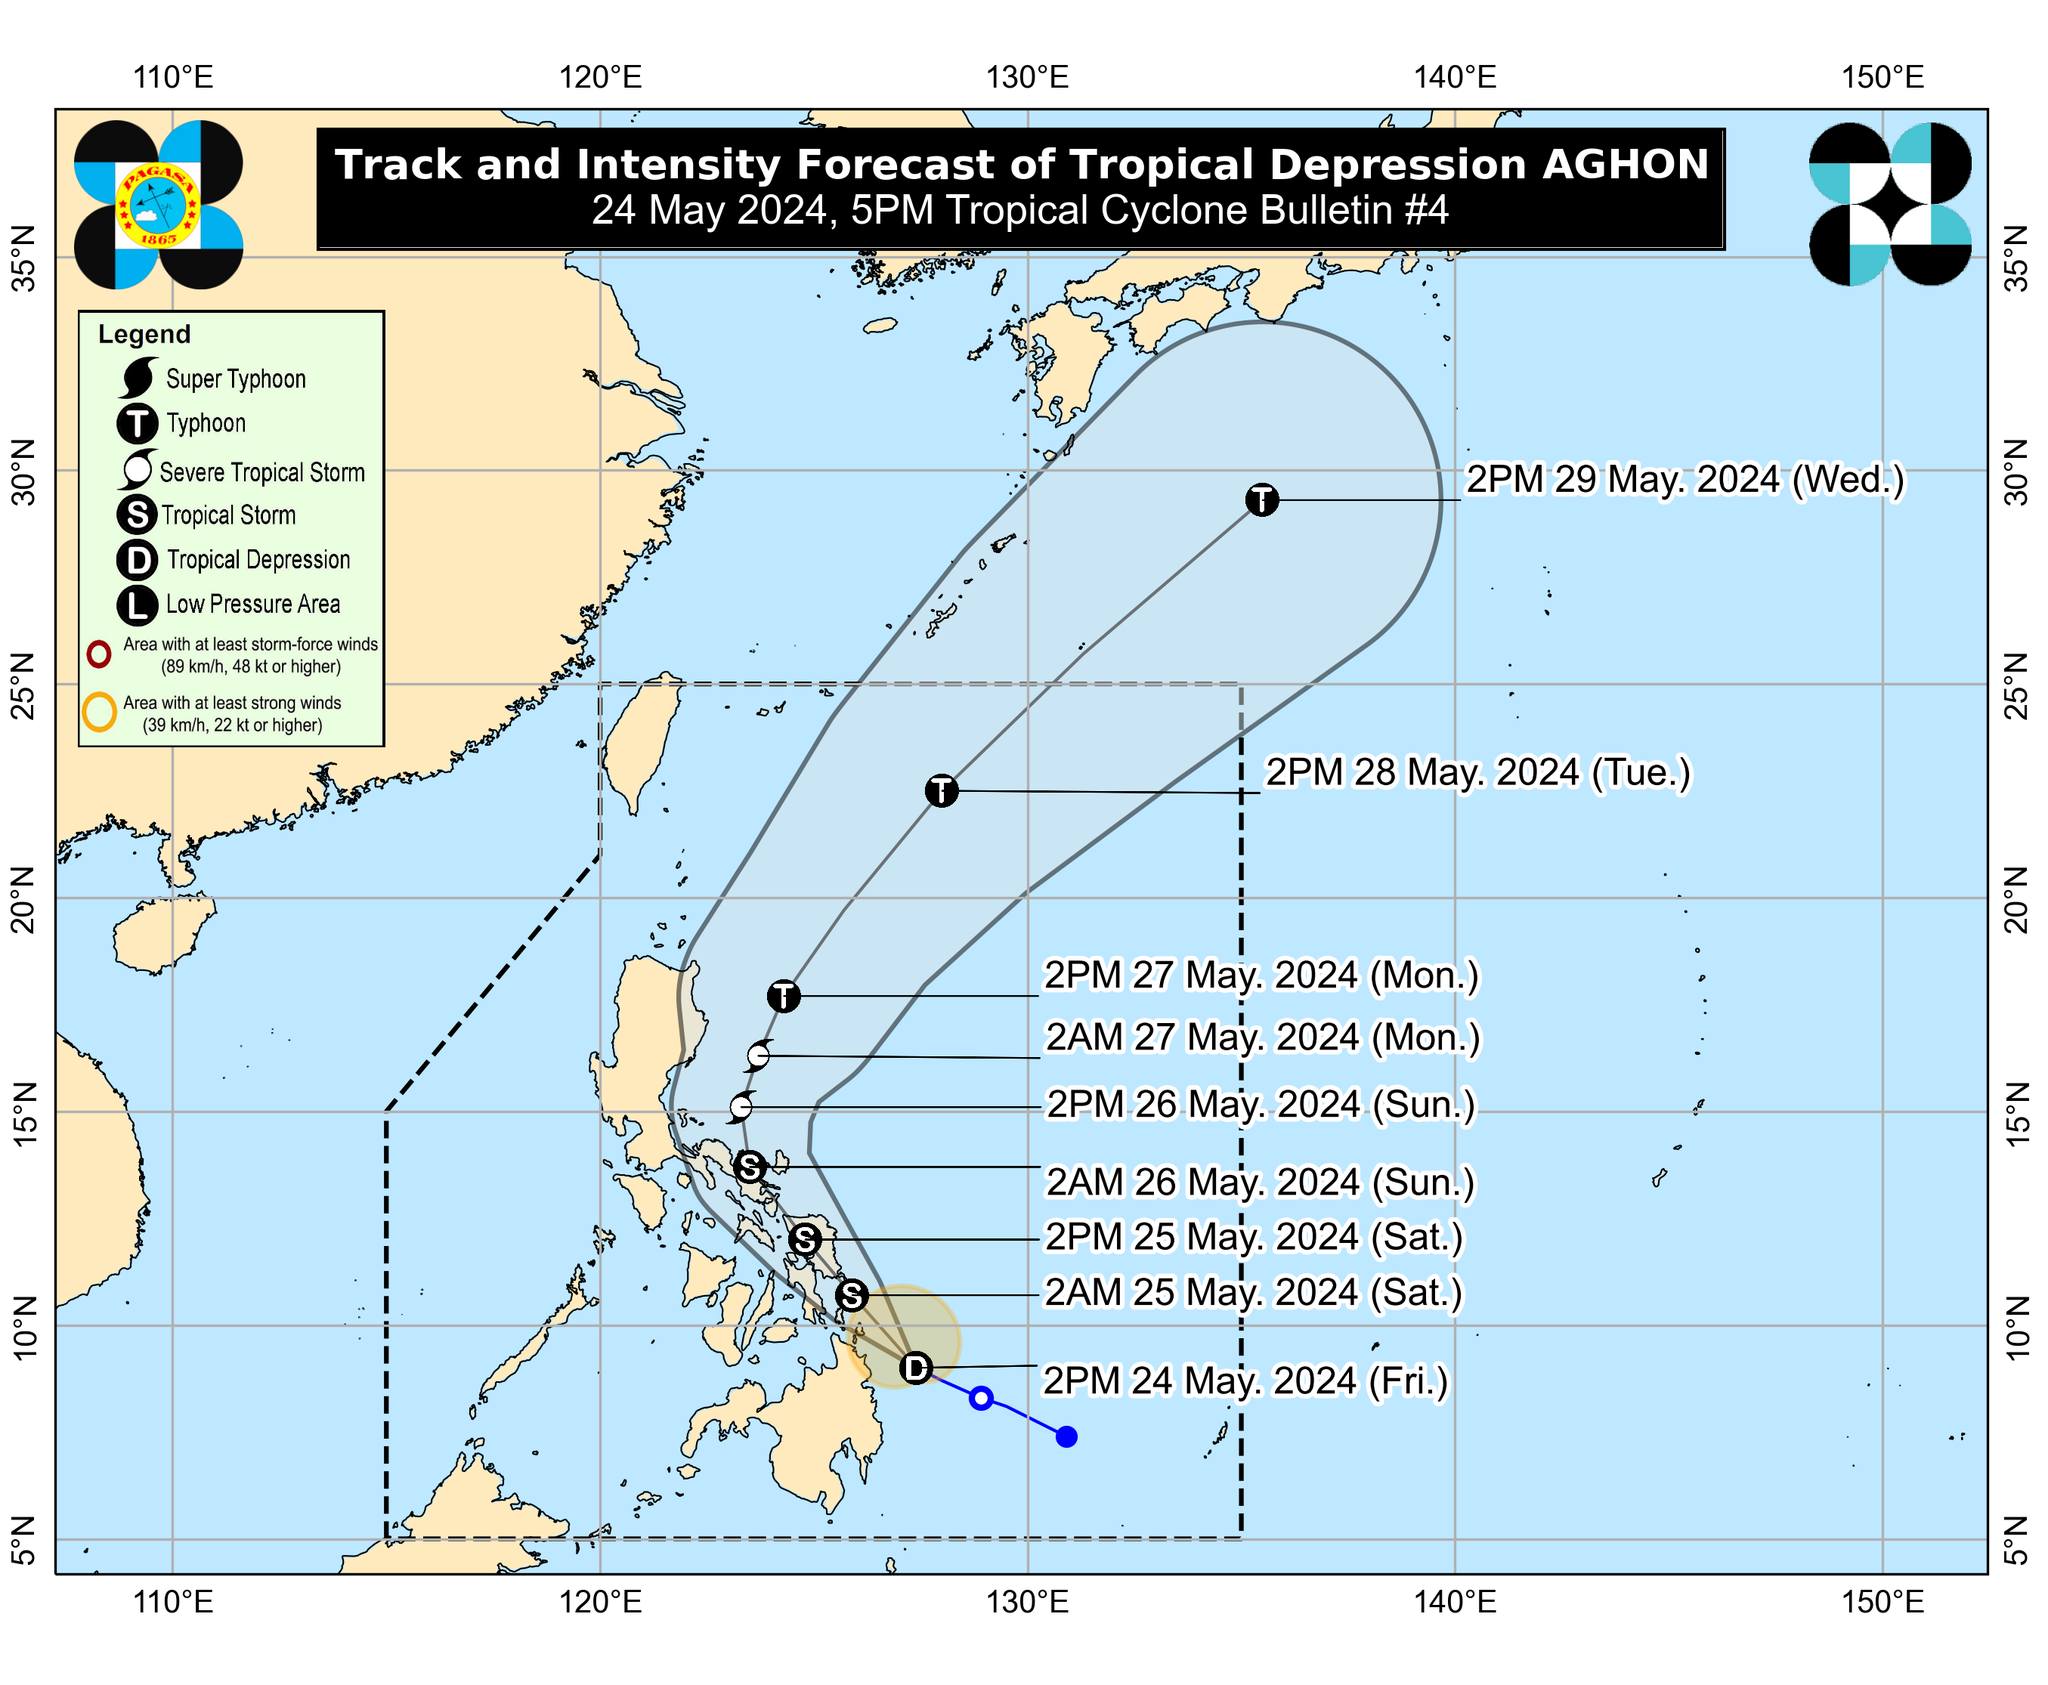 5 PM UPDATE Tropical Cyclone Wind Signal No. 1 has been hoisted over 20 areas nationwide due to Tropical Depression (TD) Aghon, the state weather bureau said on Friday afternoon.